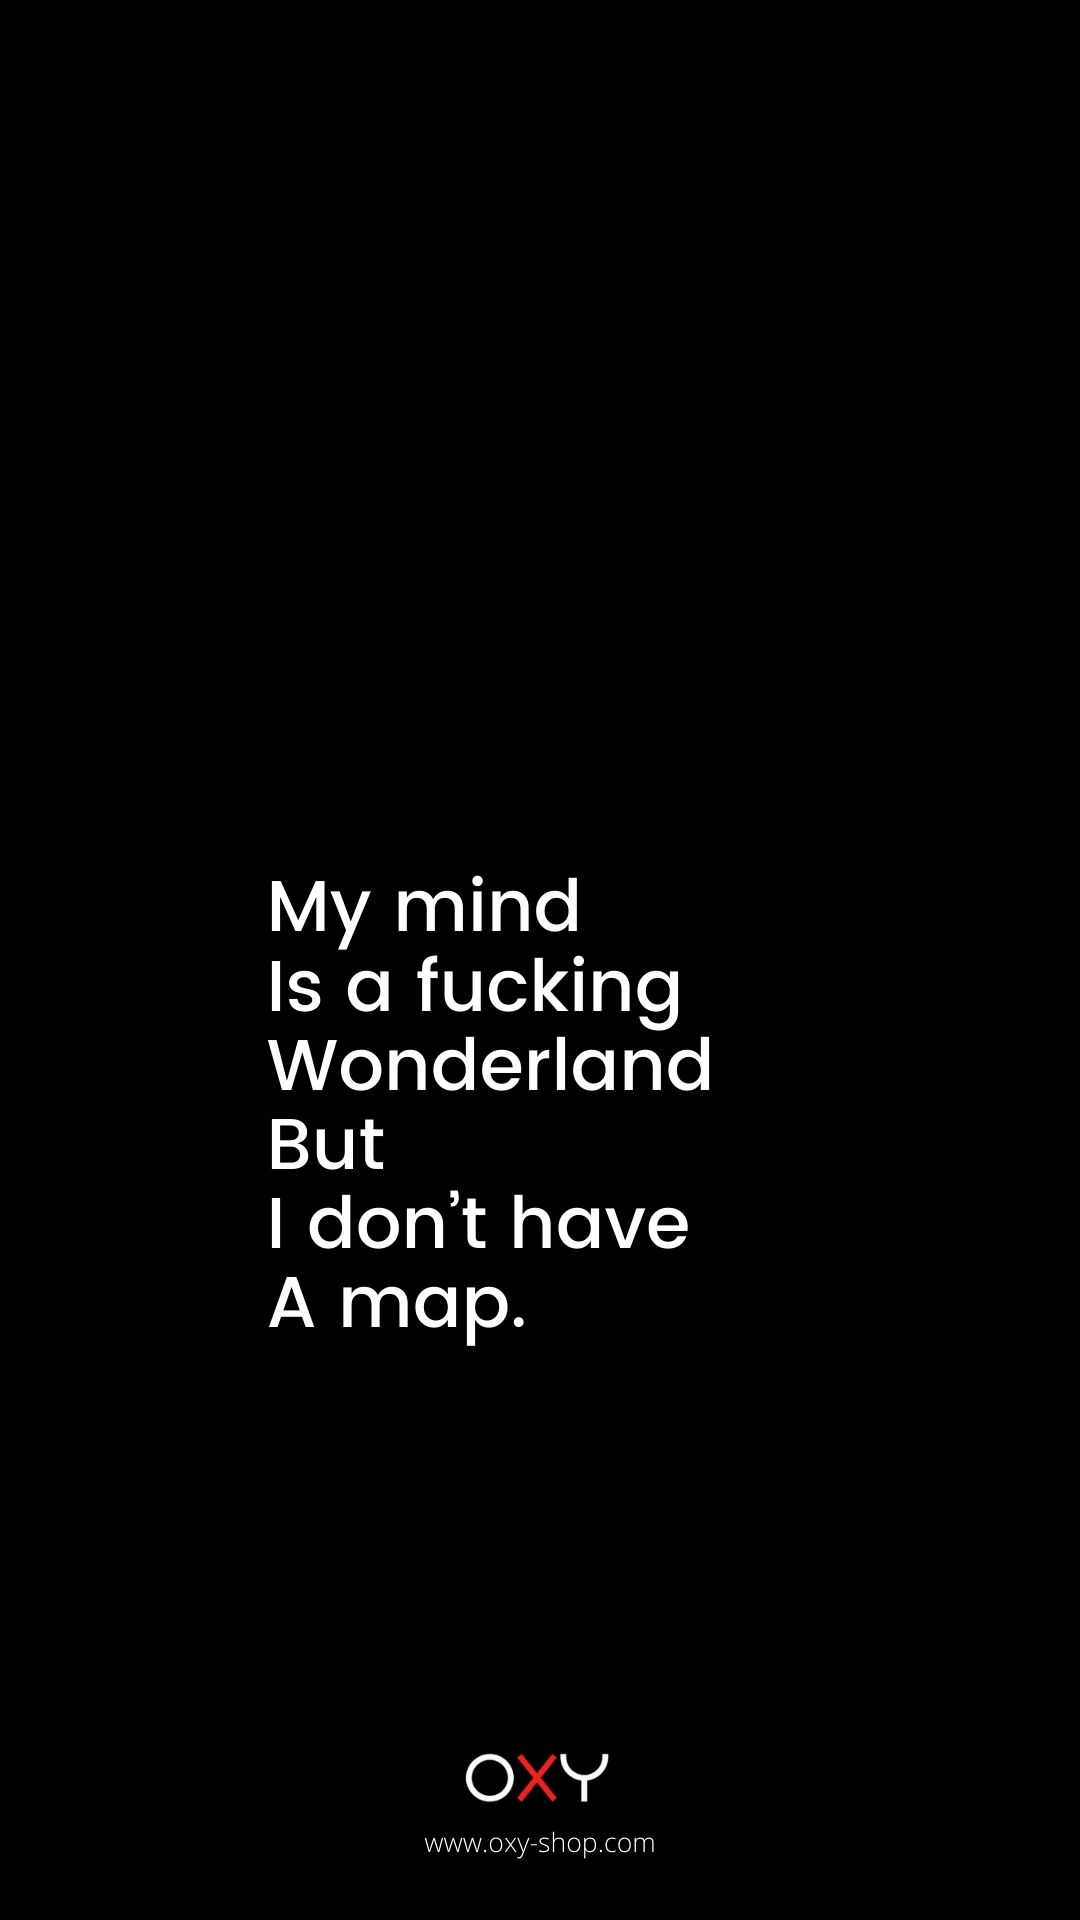 My mind is a fucking wonderland but I do not have a map. - BDSM wallpaper